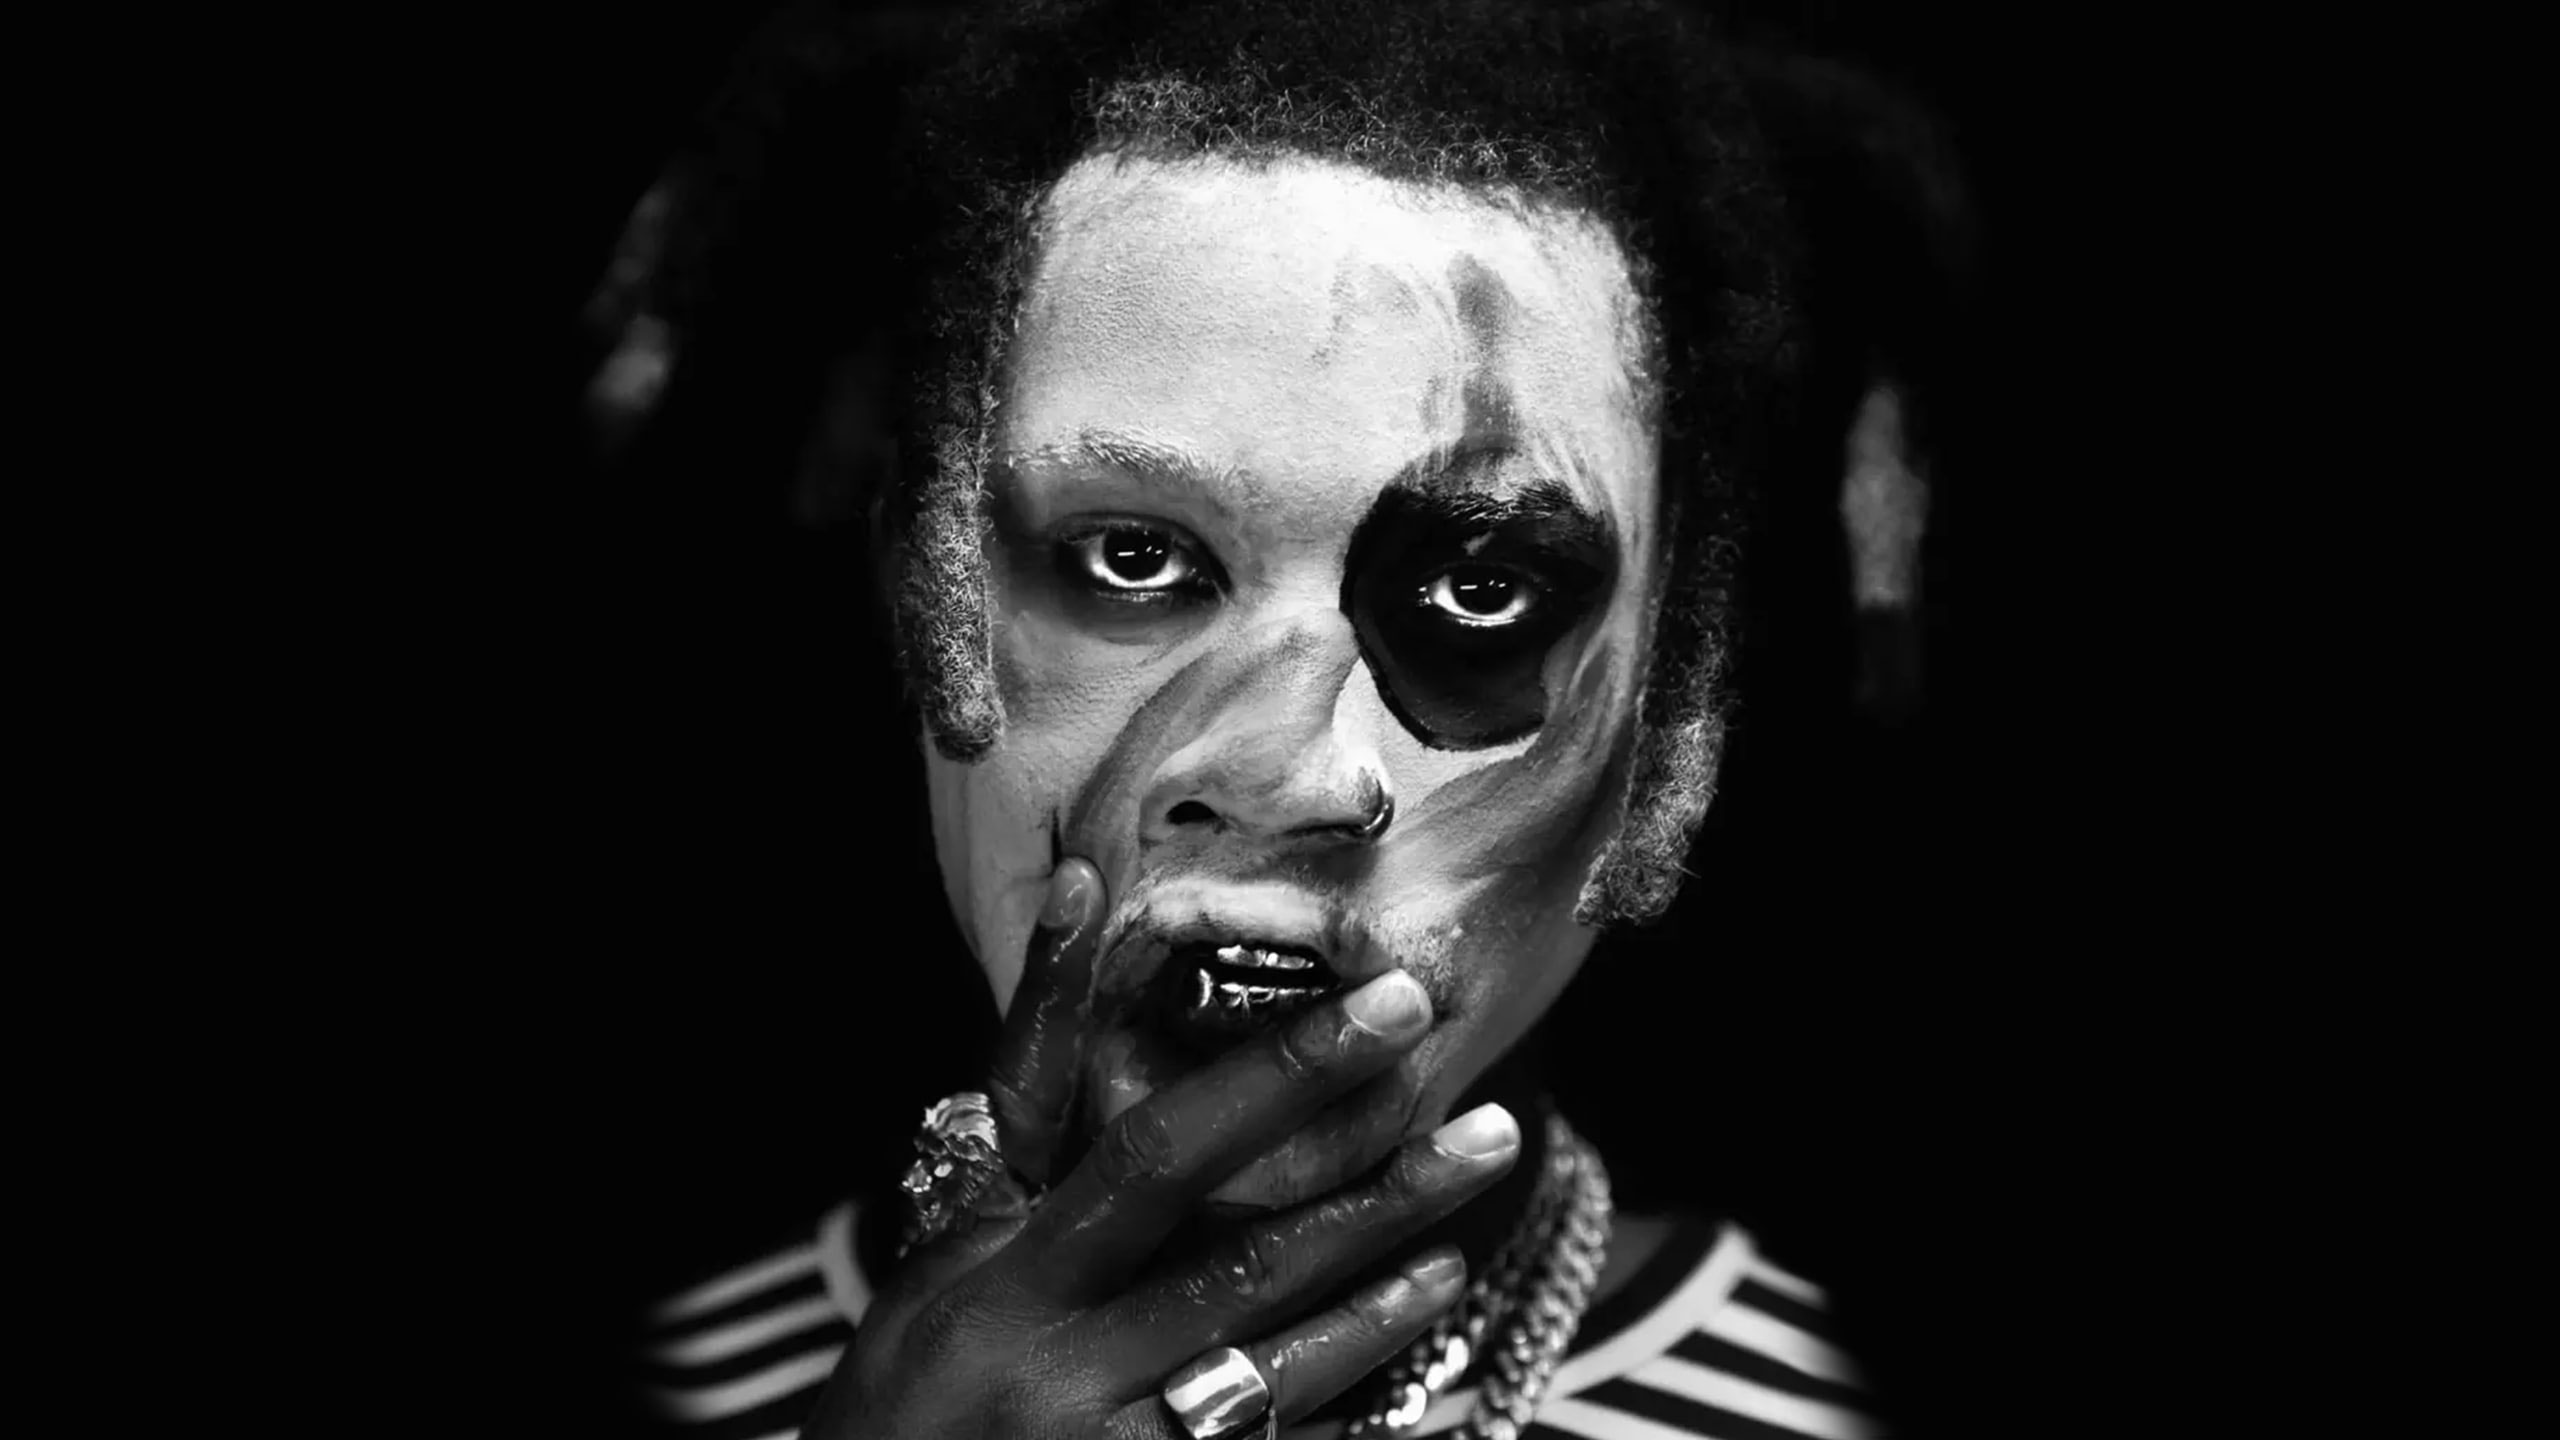 Wallpaper Grayscale Photo Of Man, Denzel Curry, Music